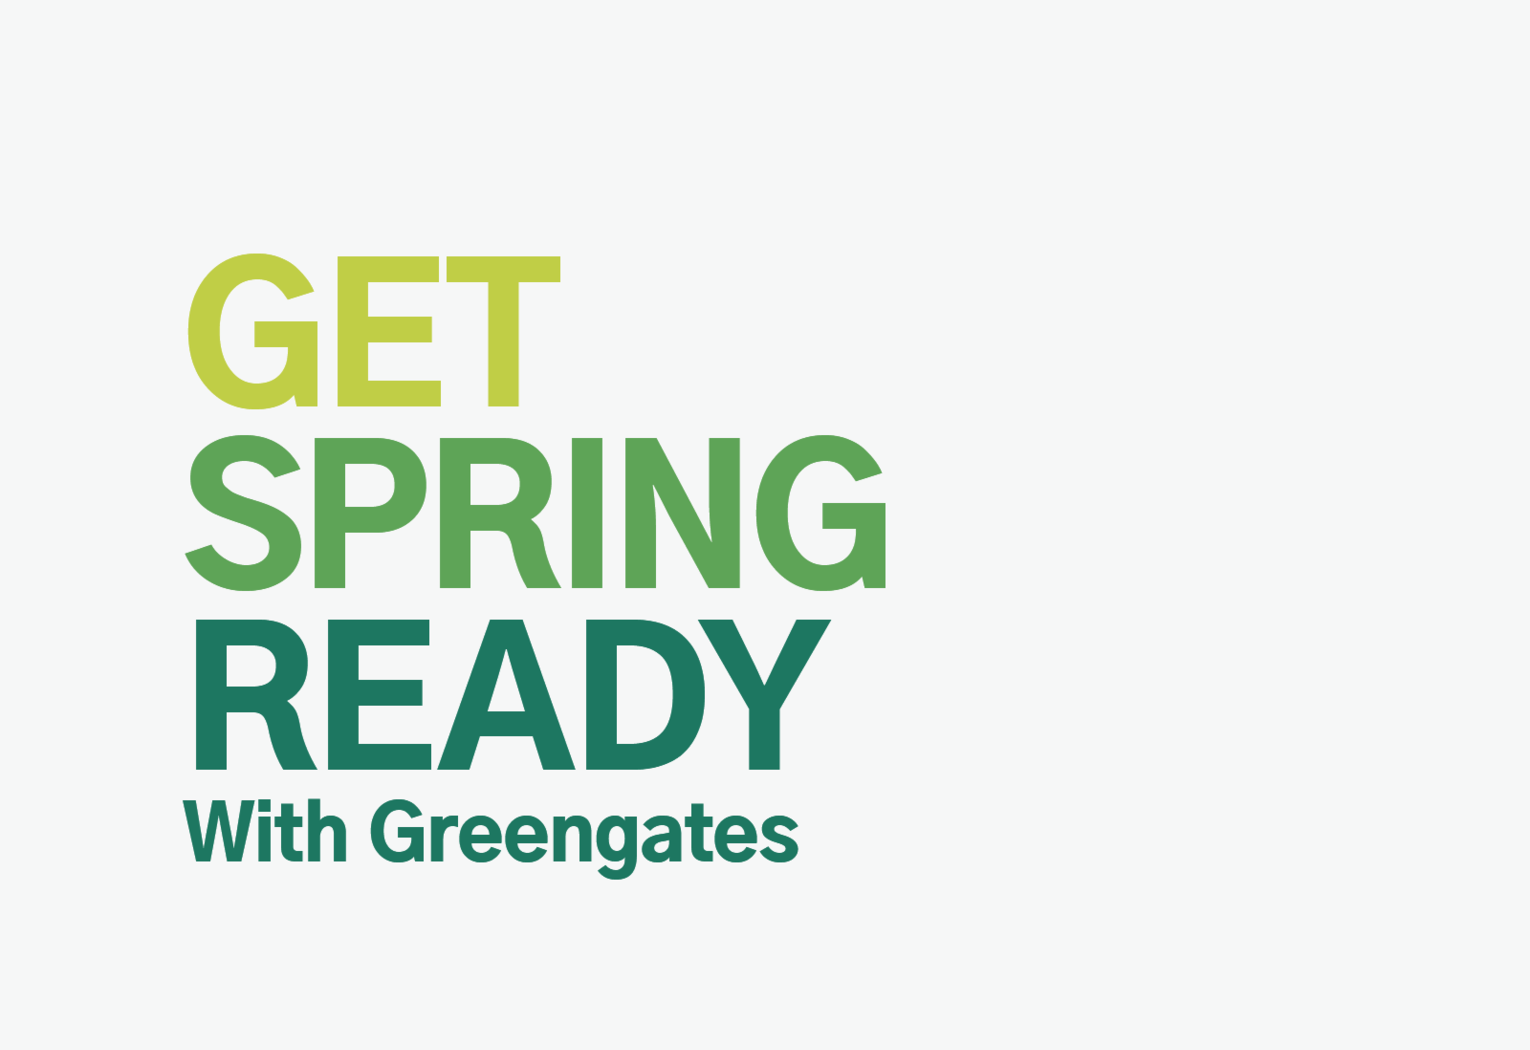 Get Spring Ready with Greengates